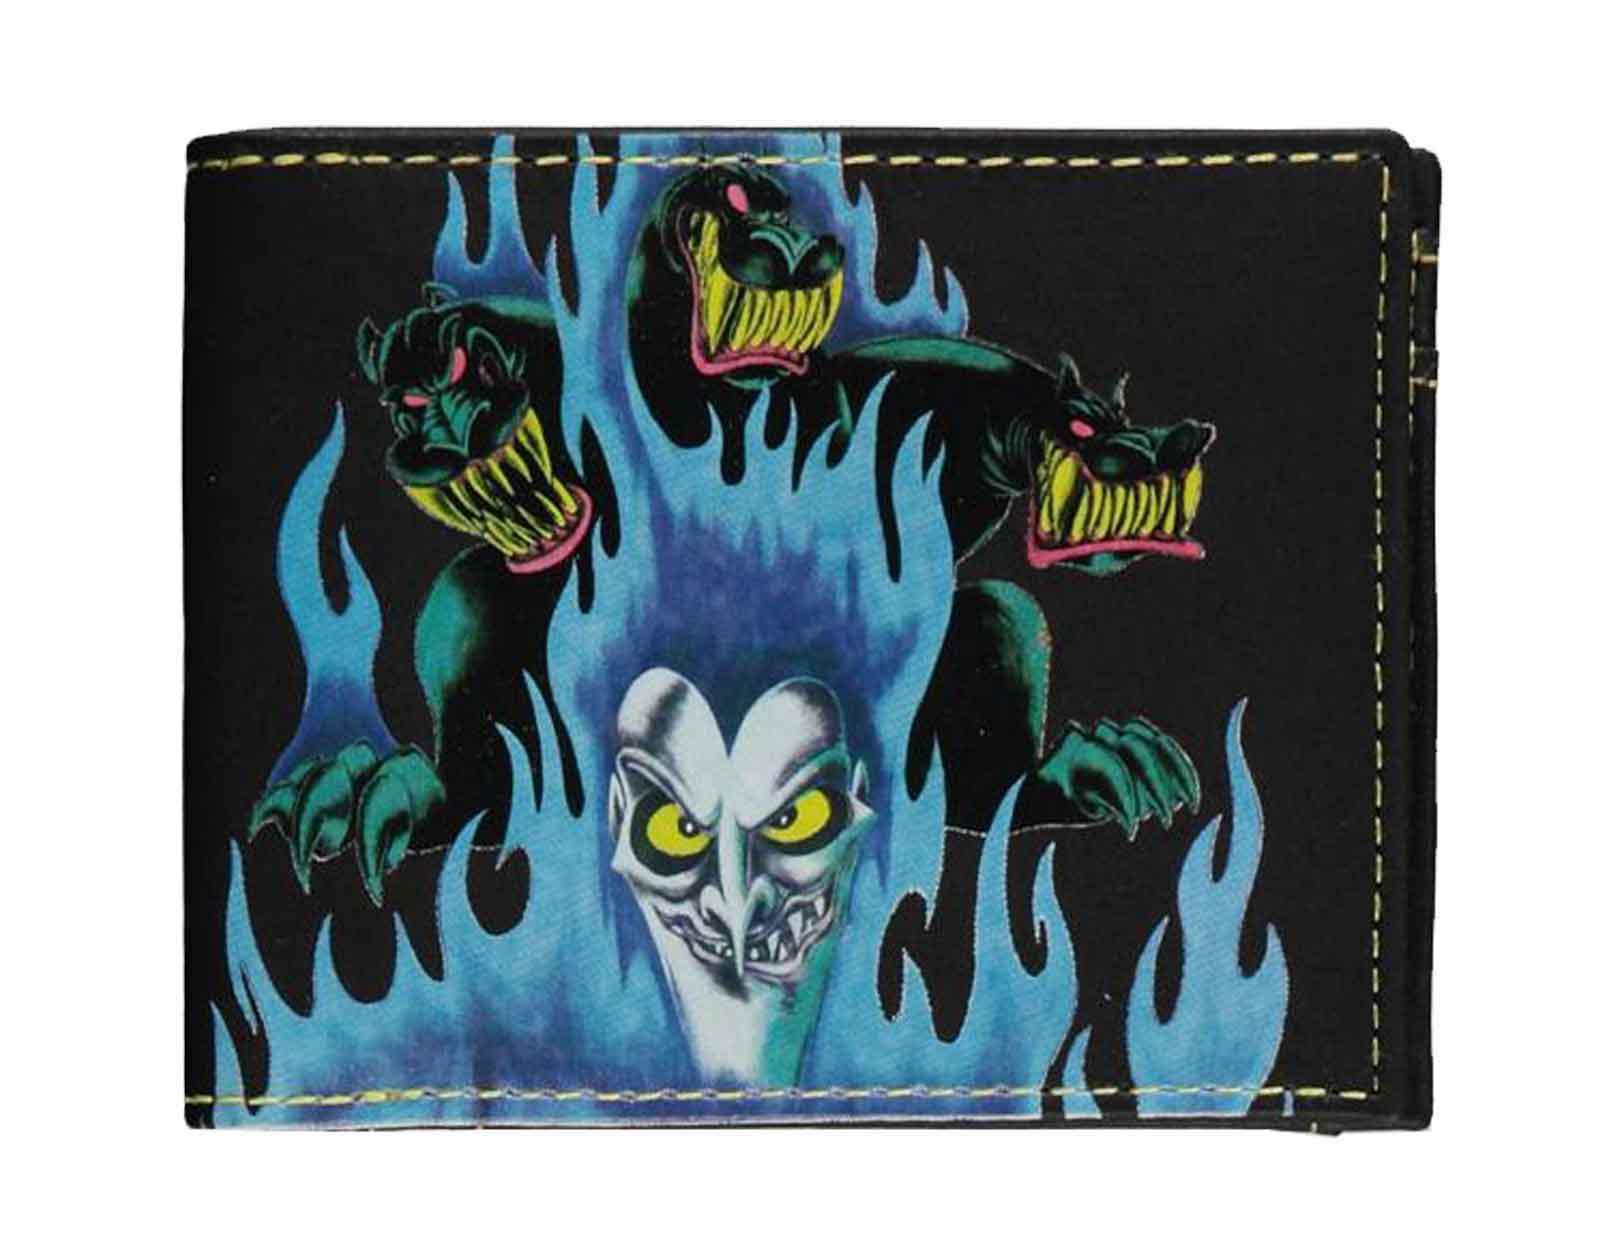 Villains Wallet Hades logo new Official Black Bifold One Size